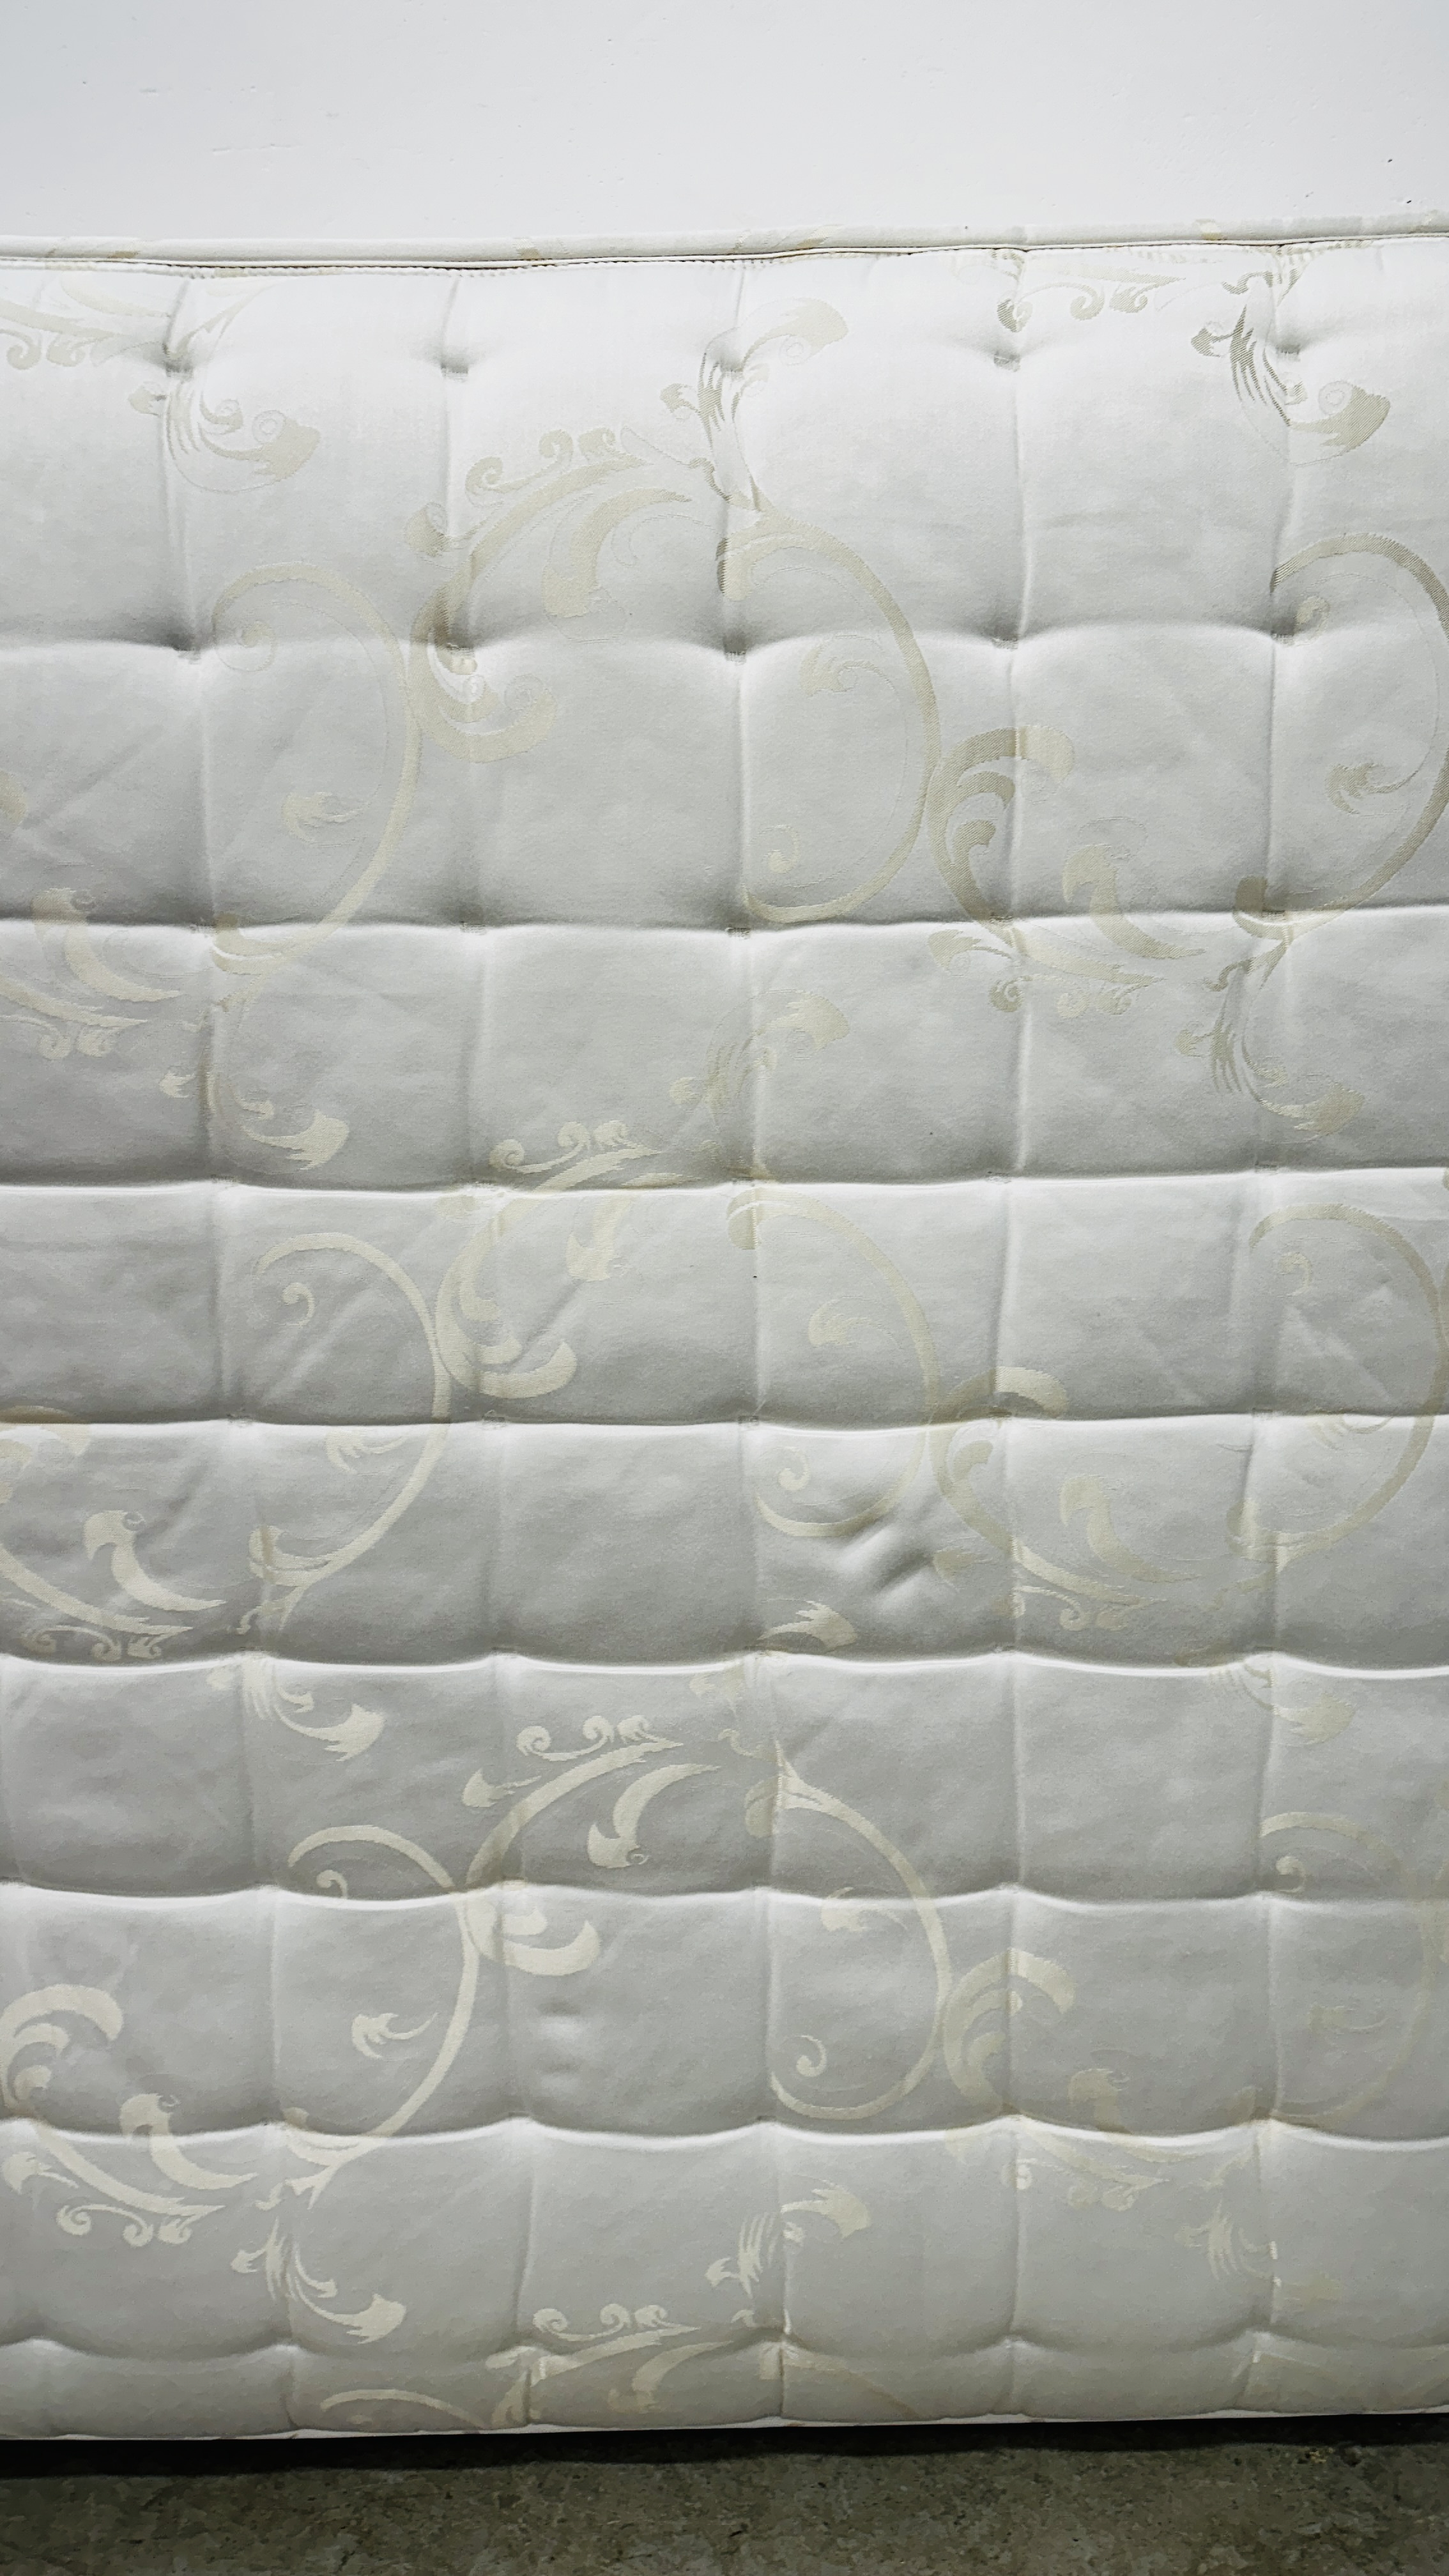 MYERS "AUGUSTA" DEEP QUILTED DOUBLE MATTRESS. - Image 3 of 10